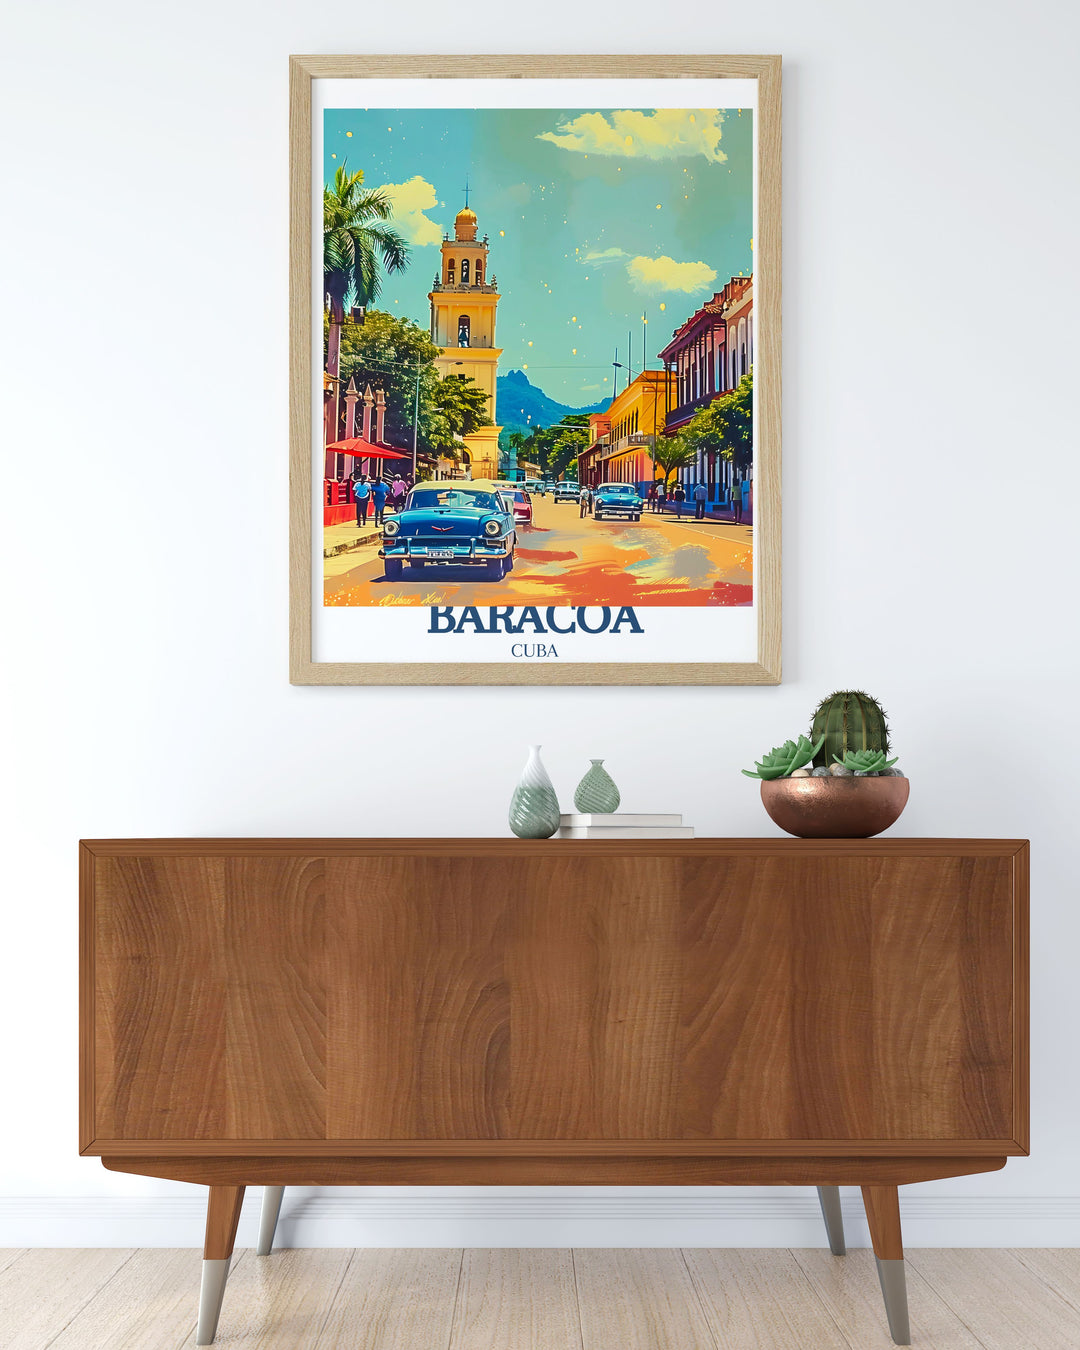 Elegant Cuba wall art depicting the enchanting Baracoa and the majestic El Yunque Mountain. This piece highlights the contrast between historic architecture and natural landscapes, adding a charming yet adventurous touch to any room.